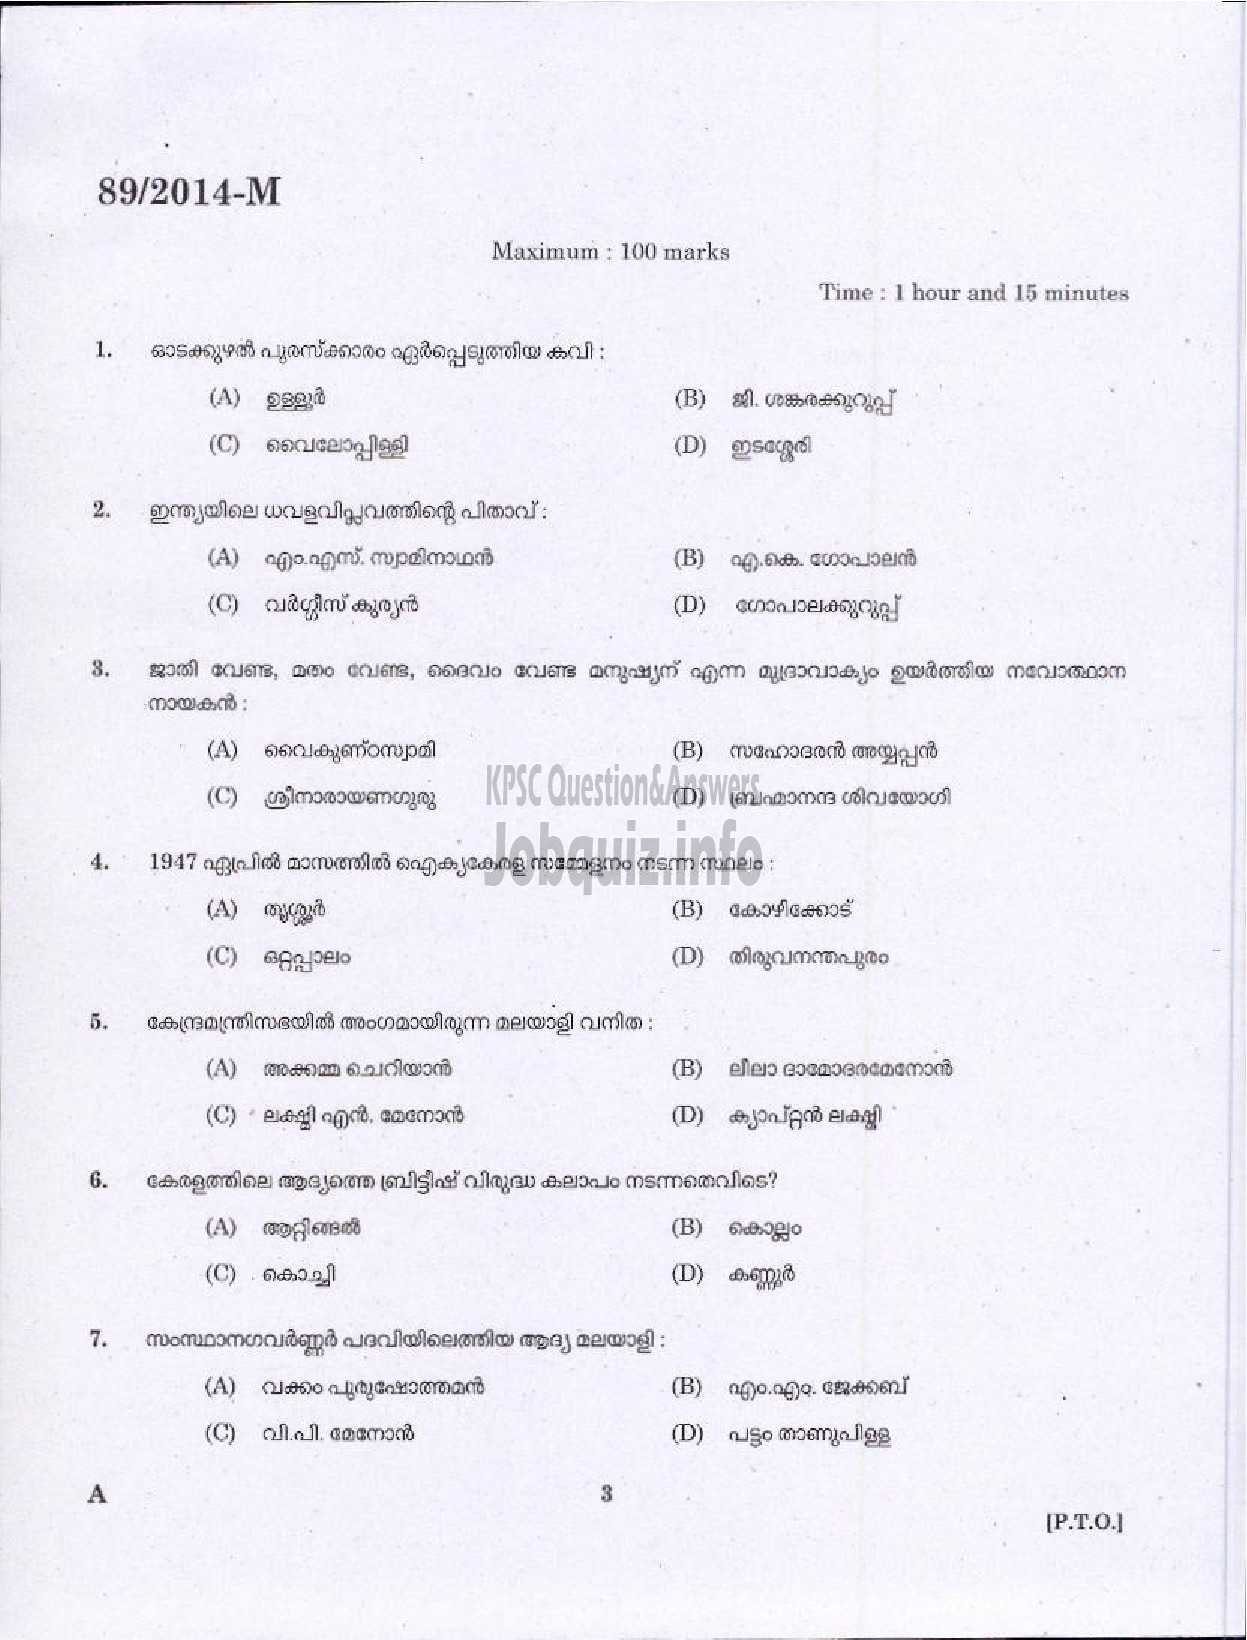 Kerala PSC Question Paper - ATTENDER SR FOR ST ONLY TCC LTD AND LGS NCA OBC VARIOUS KTYM ( Malayalam ) -1